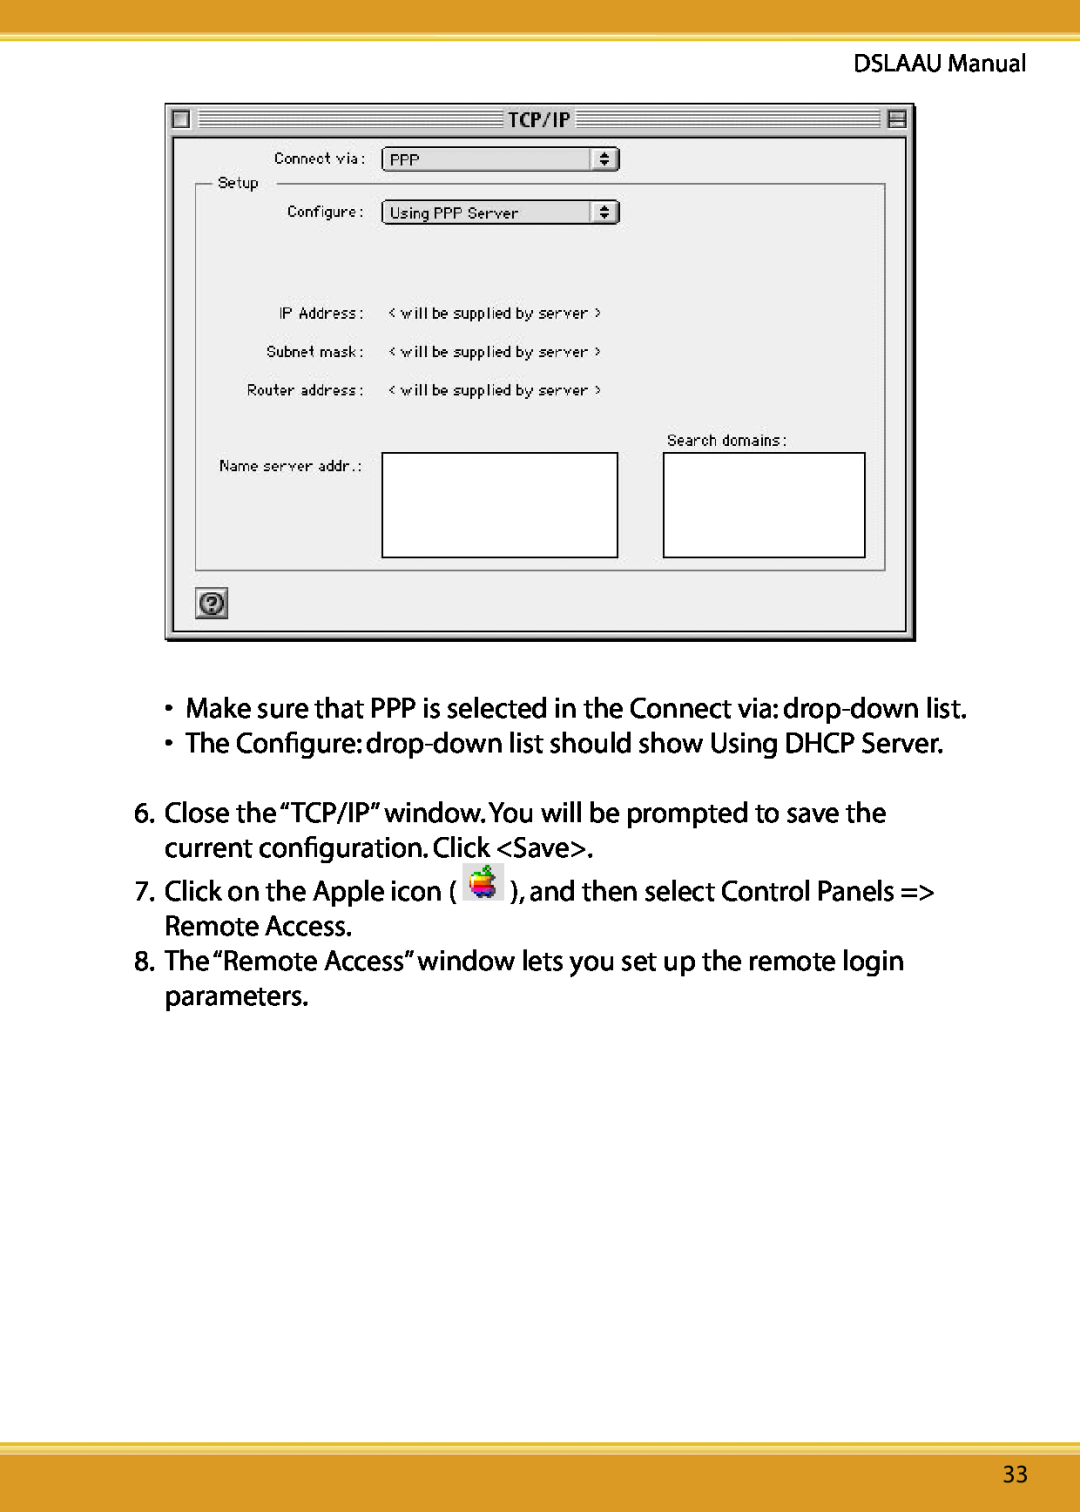 Corega DSLAAU user manual Make sure that PPP is selected in the Connect via drop-down list 